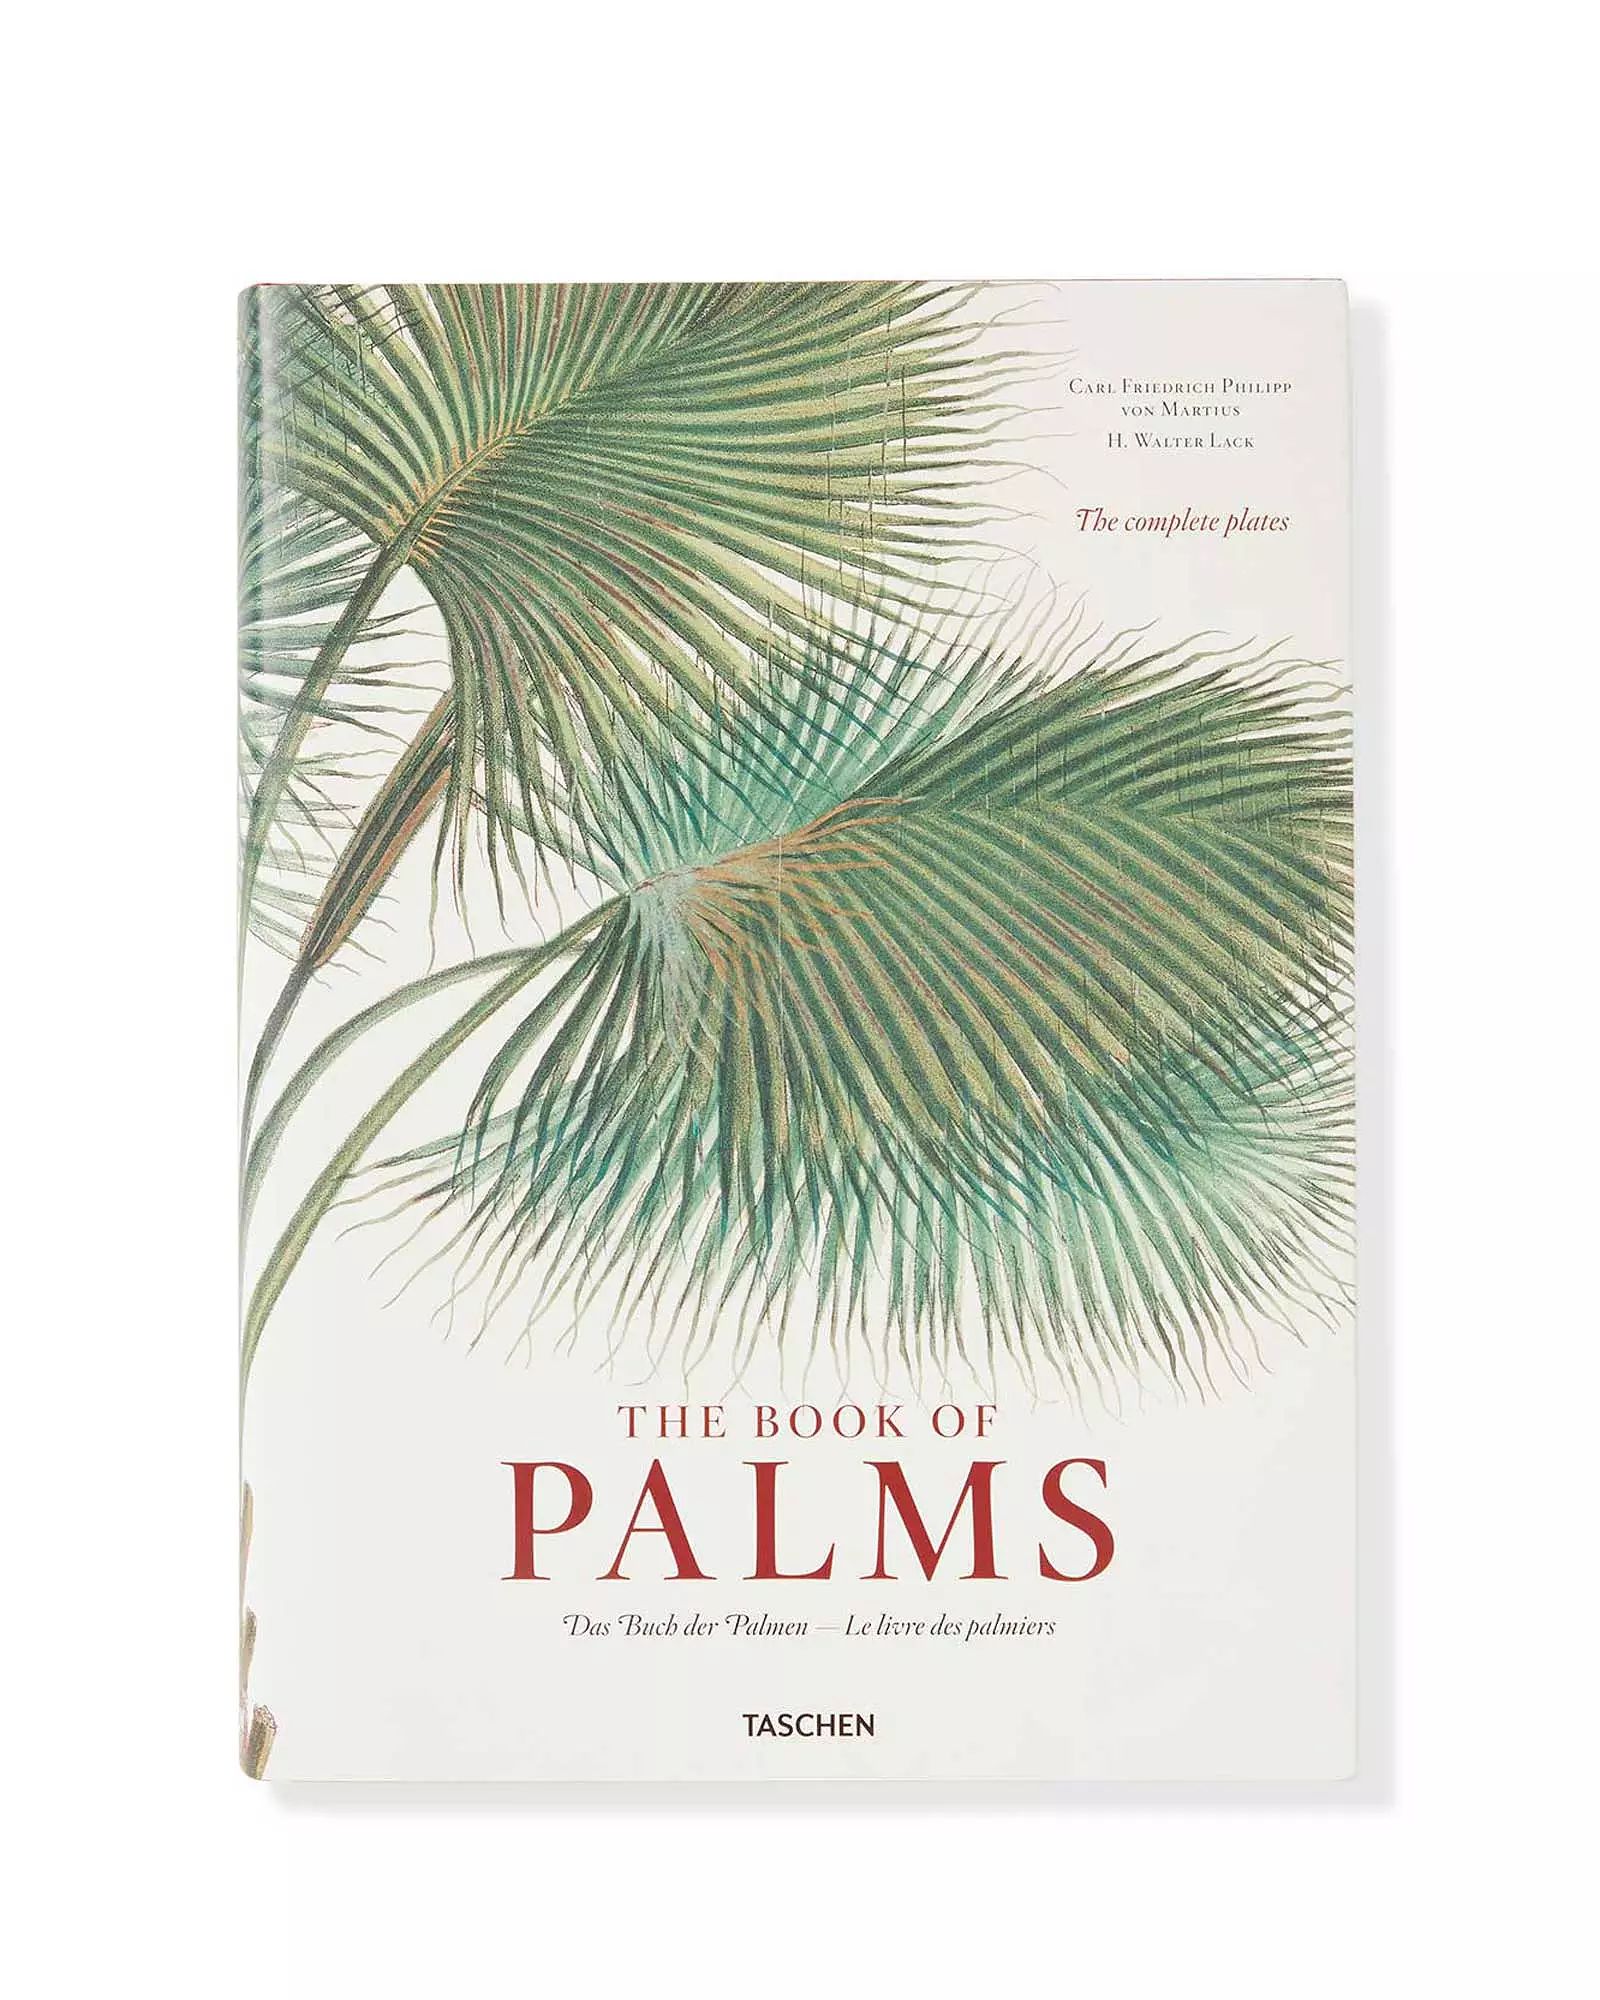 "The Book of Palms" by H. Walter Lack | Serena and Lily